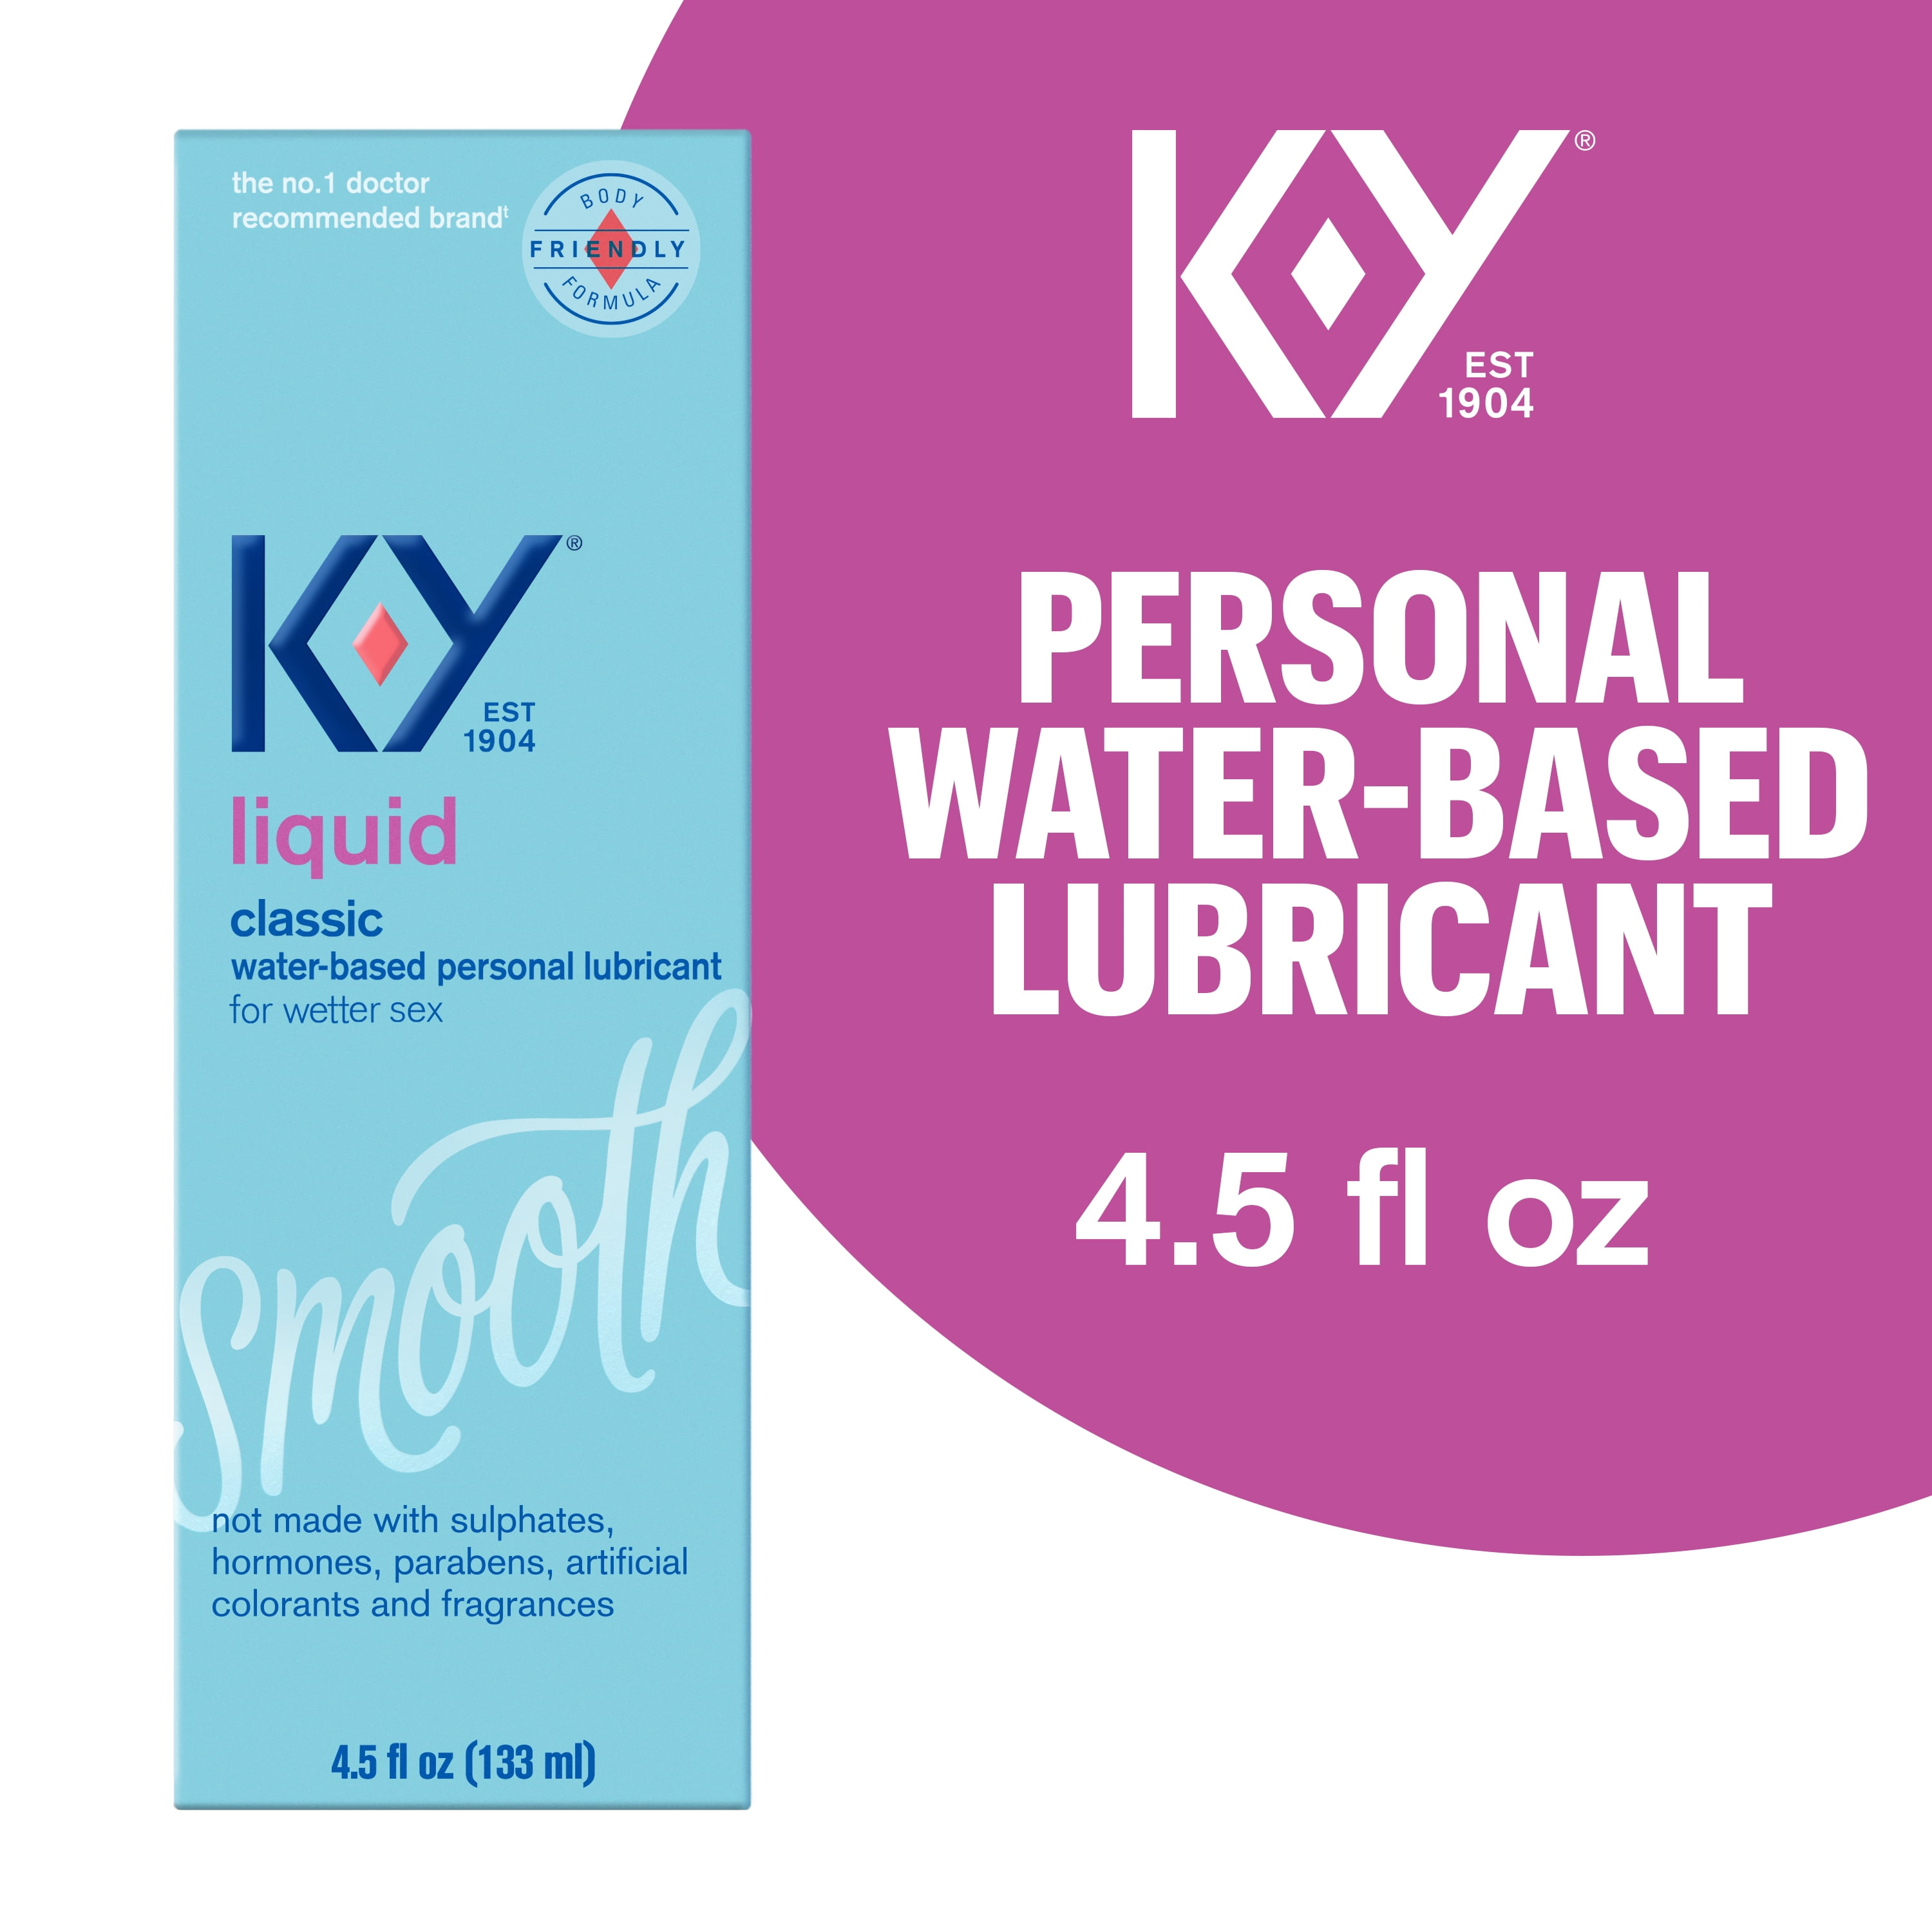 K-Y Liquid Lube, Personal Lubricant, NEW Water-Based Formula, Safe for Anal Use, Safe to Use with Latex Condoms, For Men, Women and Couples, Body Friendly 4.5 FL OZ